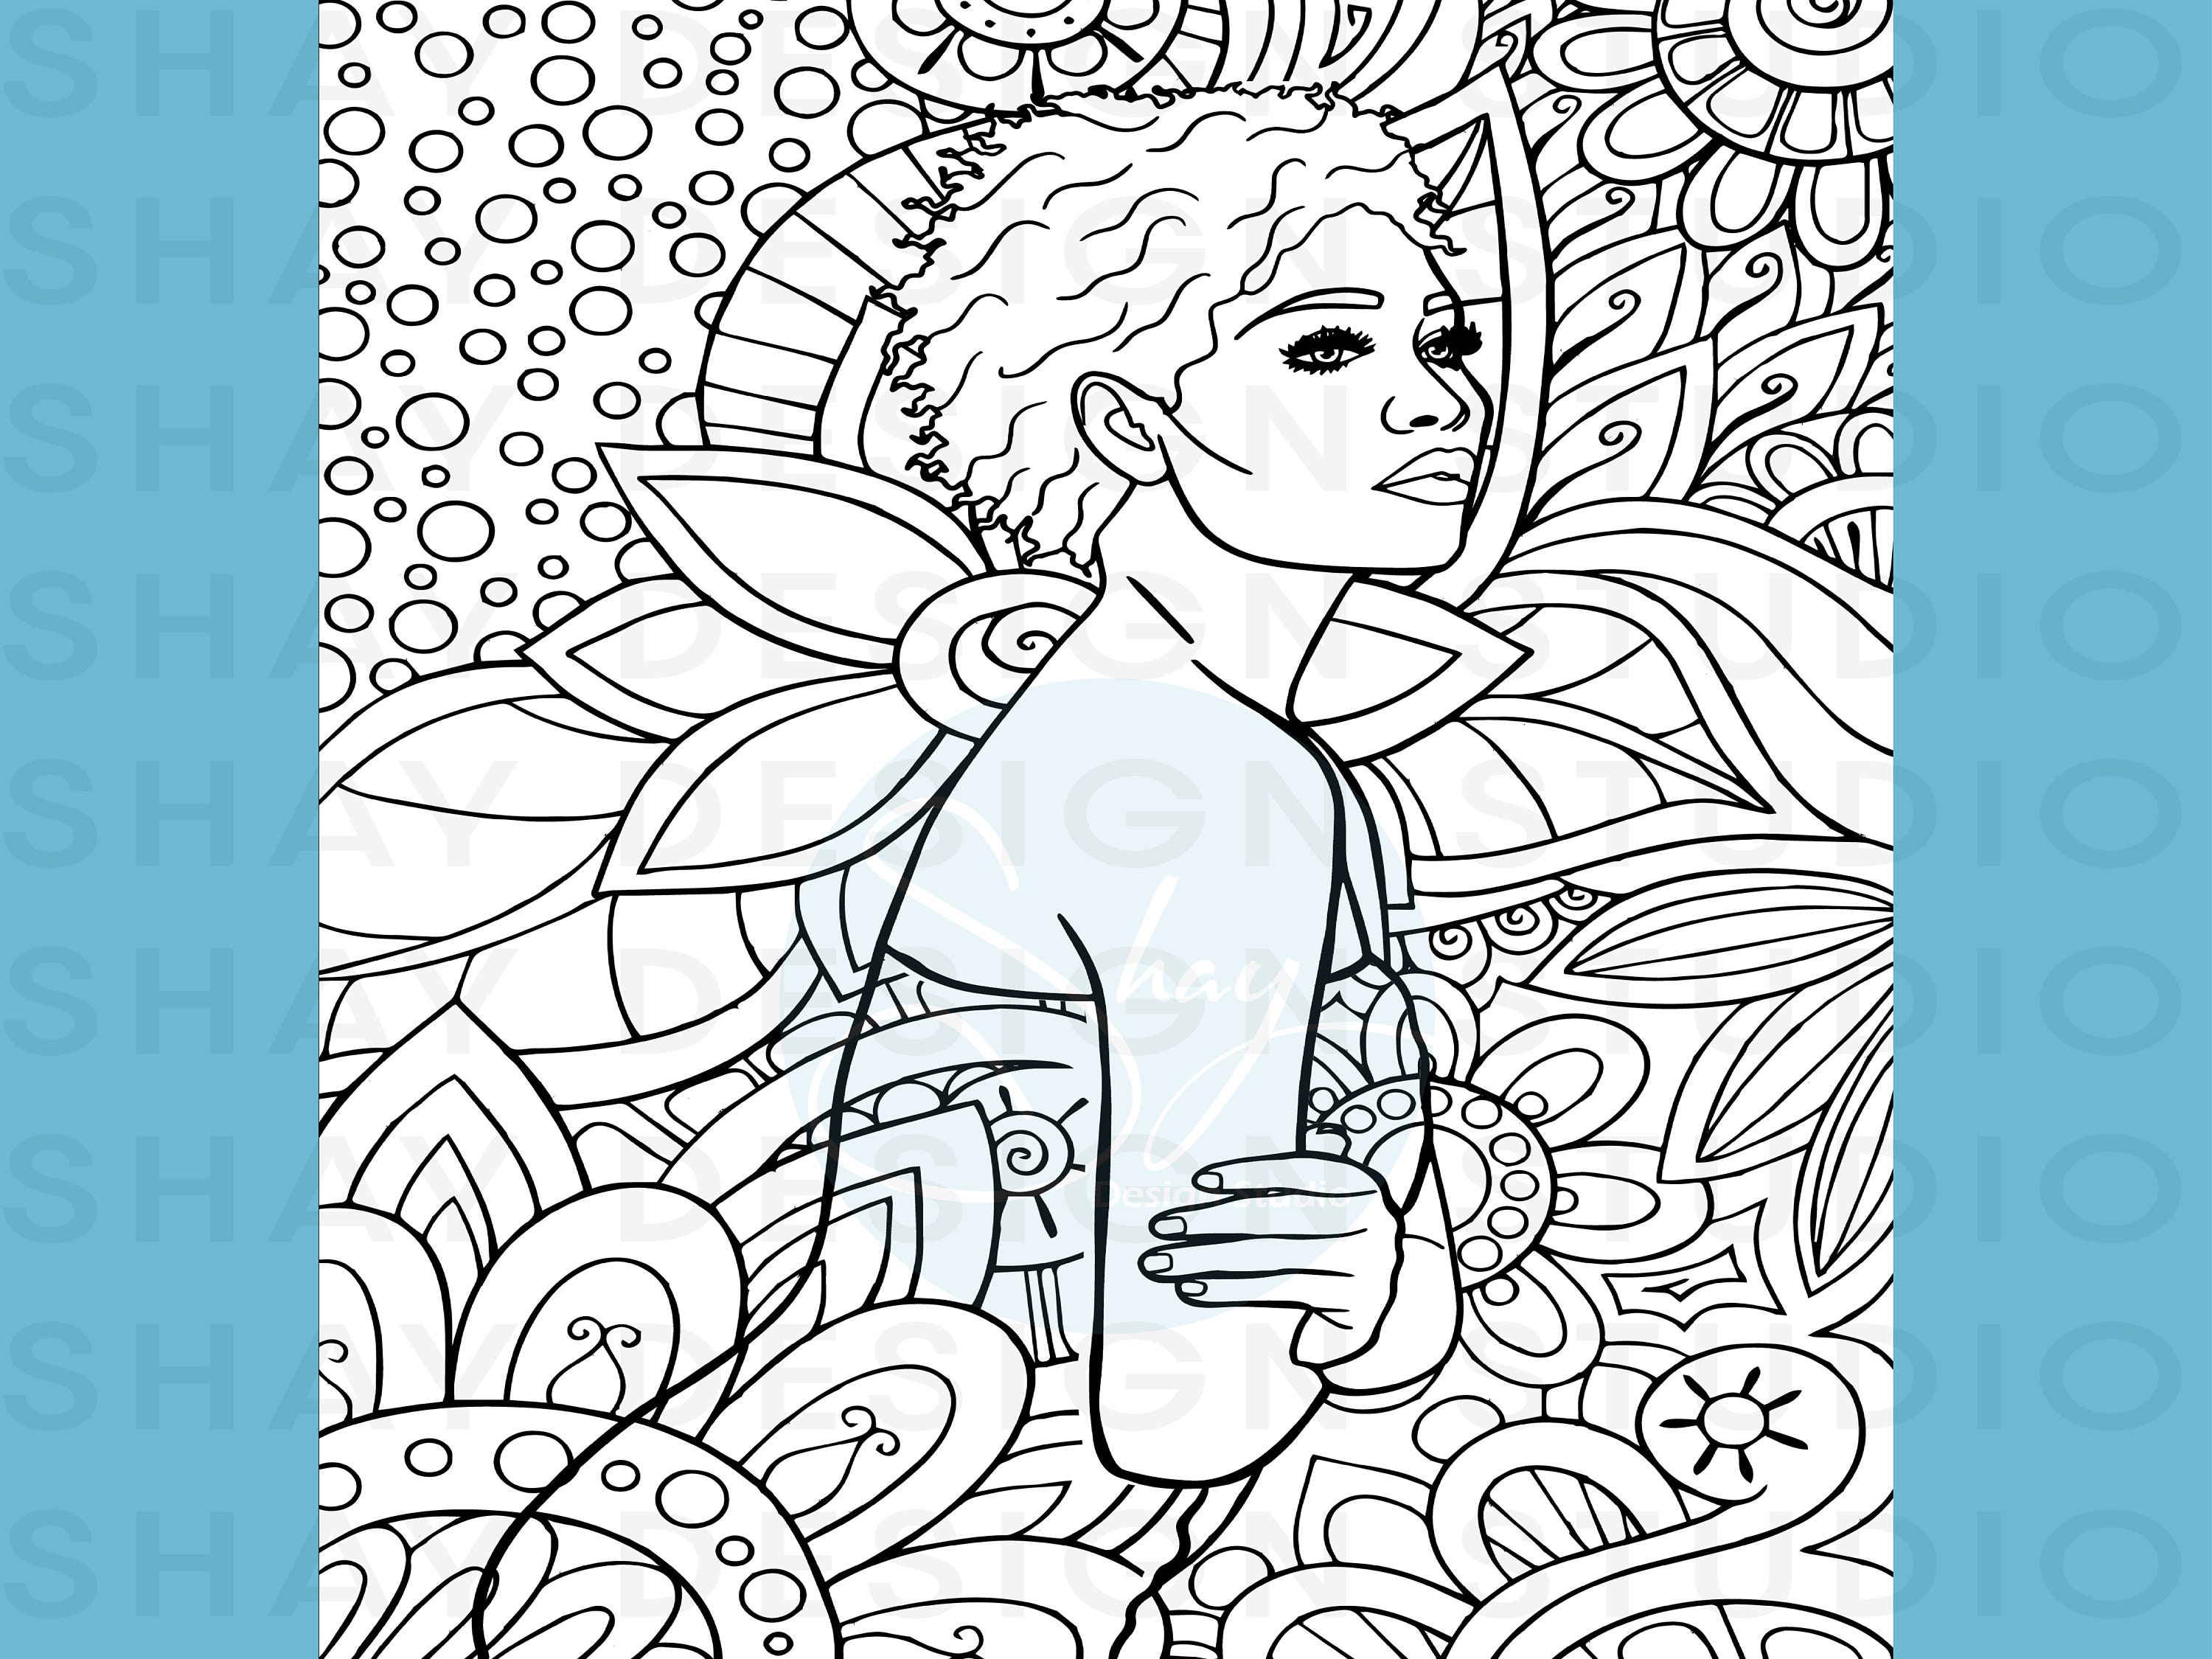 The Fashion Designer Adult Coloring Book Page Black Women 